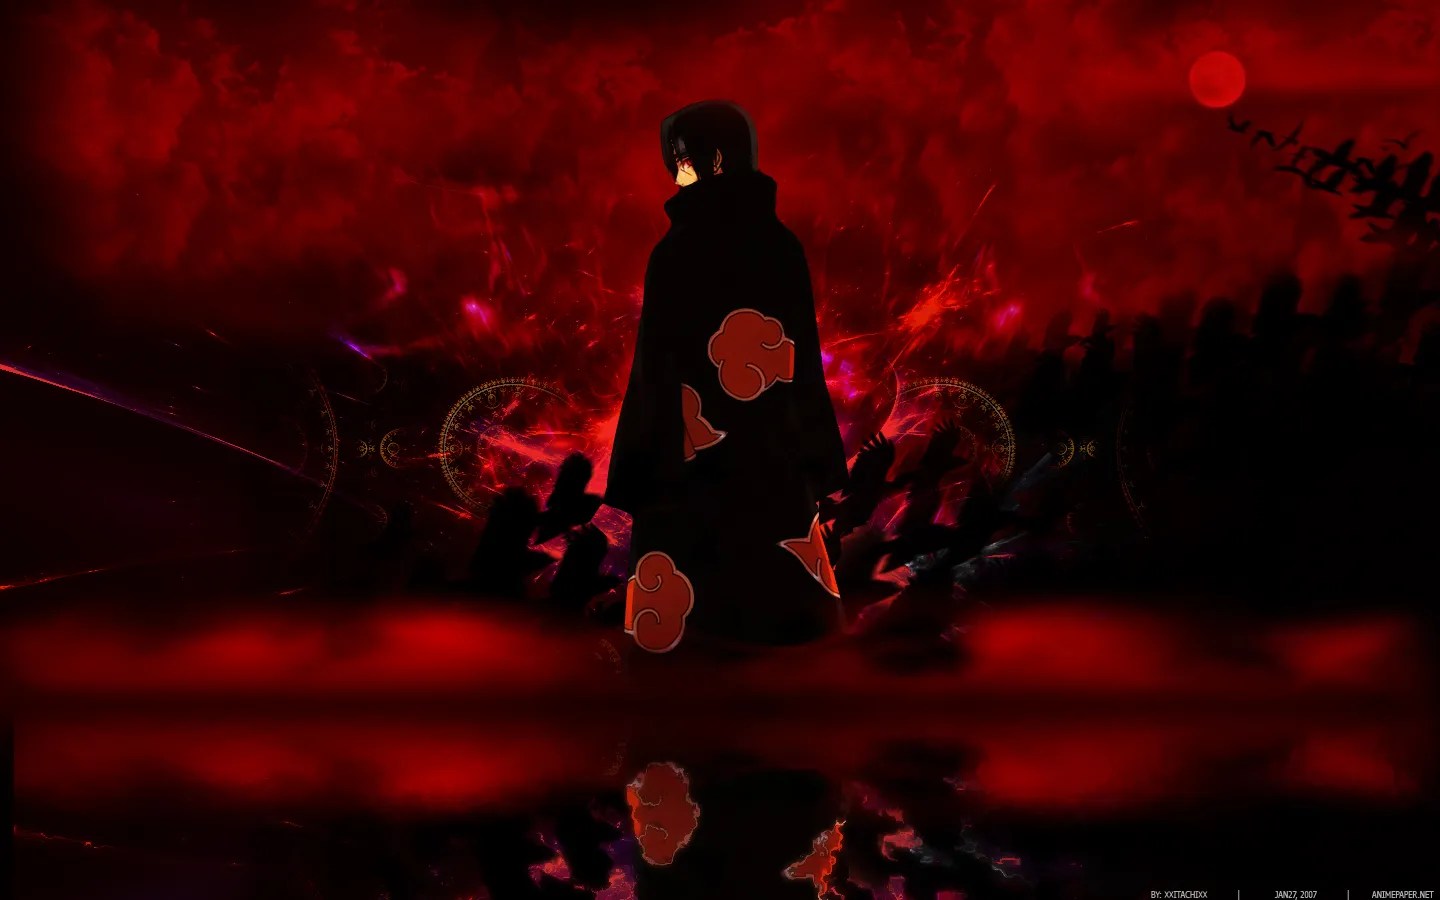 Itachi With Hat Wallpapers